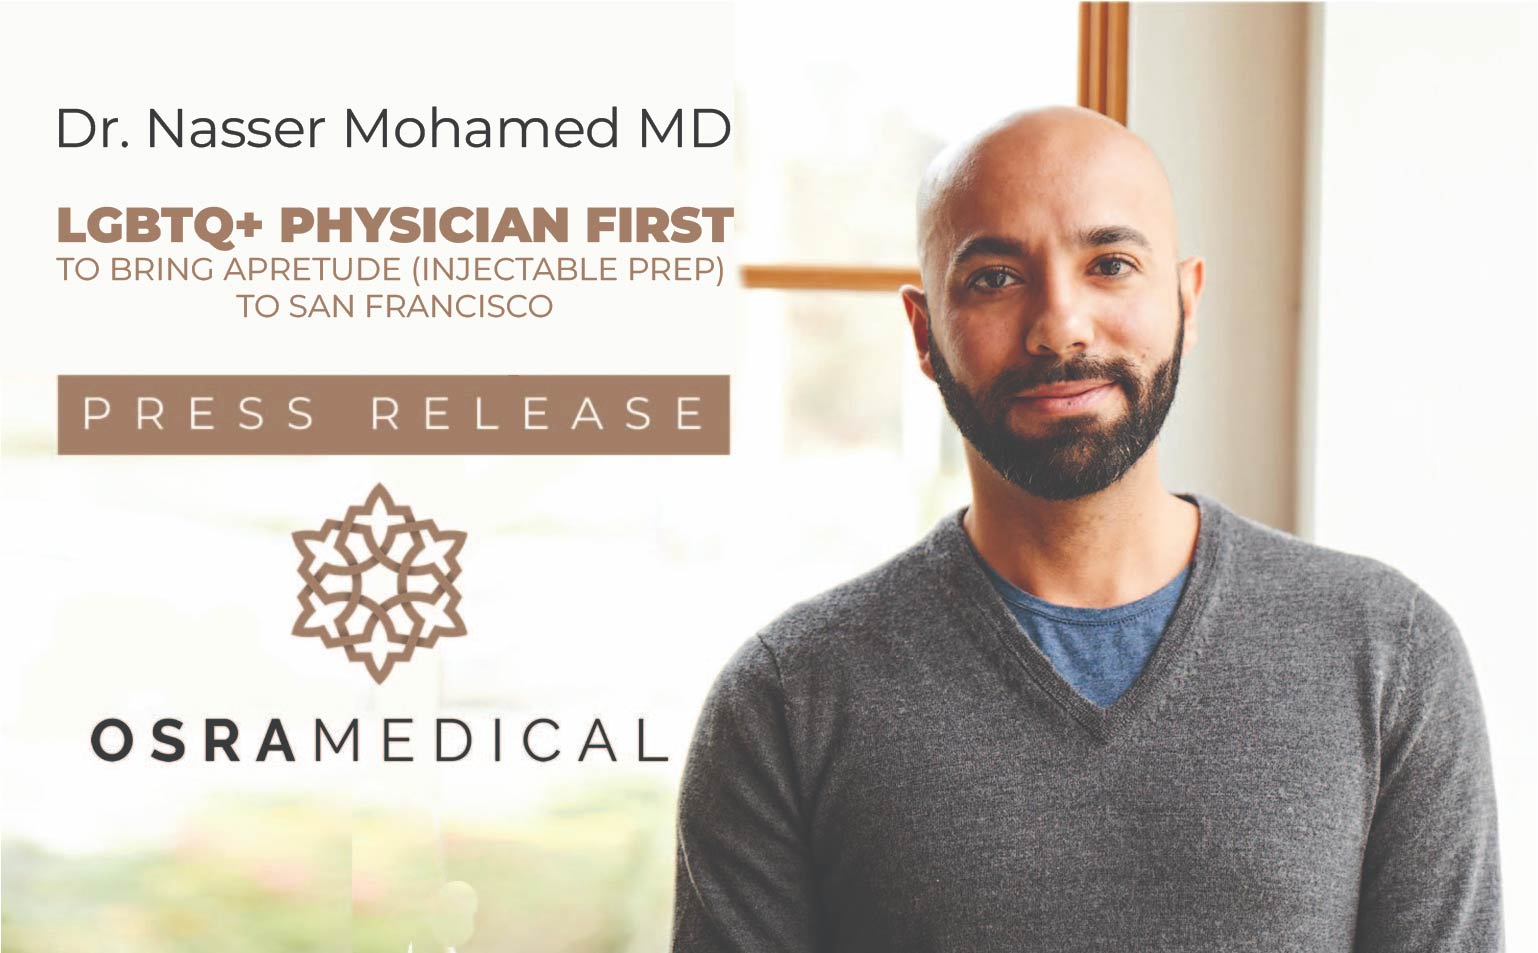 You are currently viewing LGBTQ+ PHYSICIAN FIRST TO BRING APRETUDE (INJECTABLE PREP) TO SAN FRANCISCO